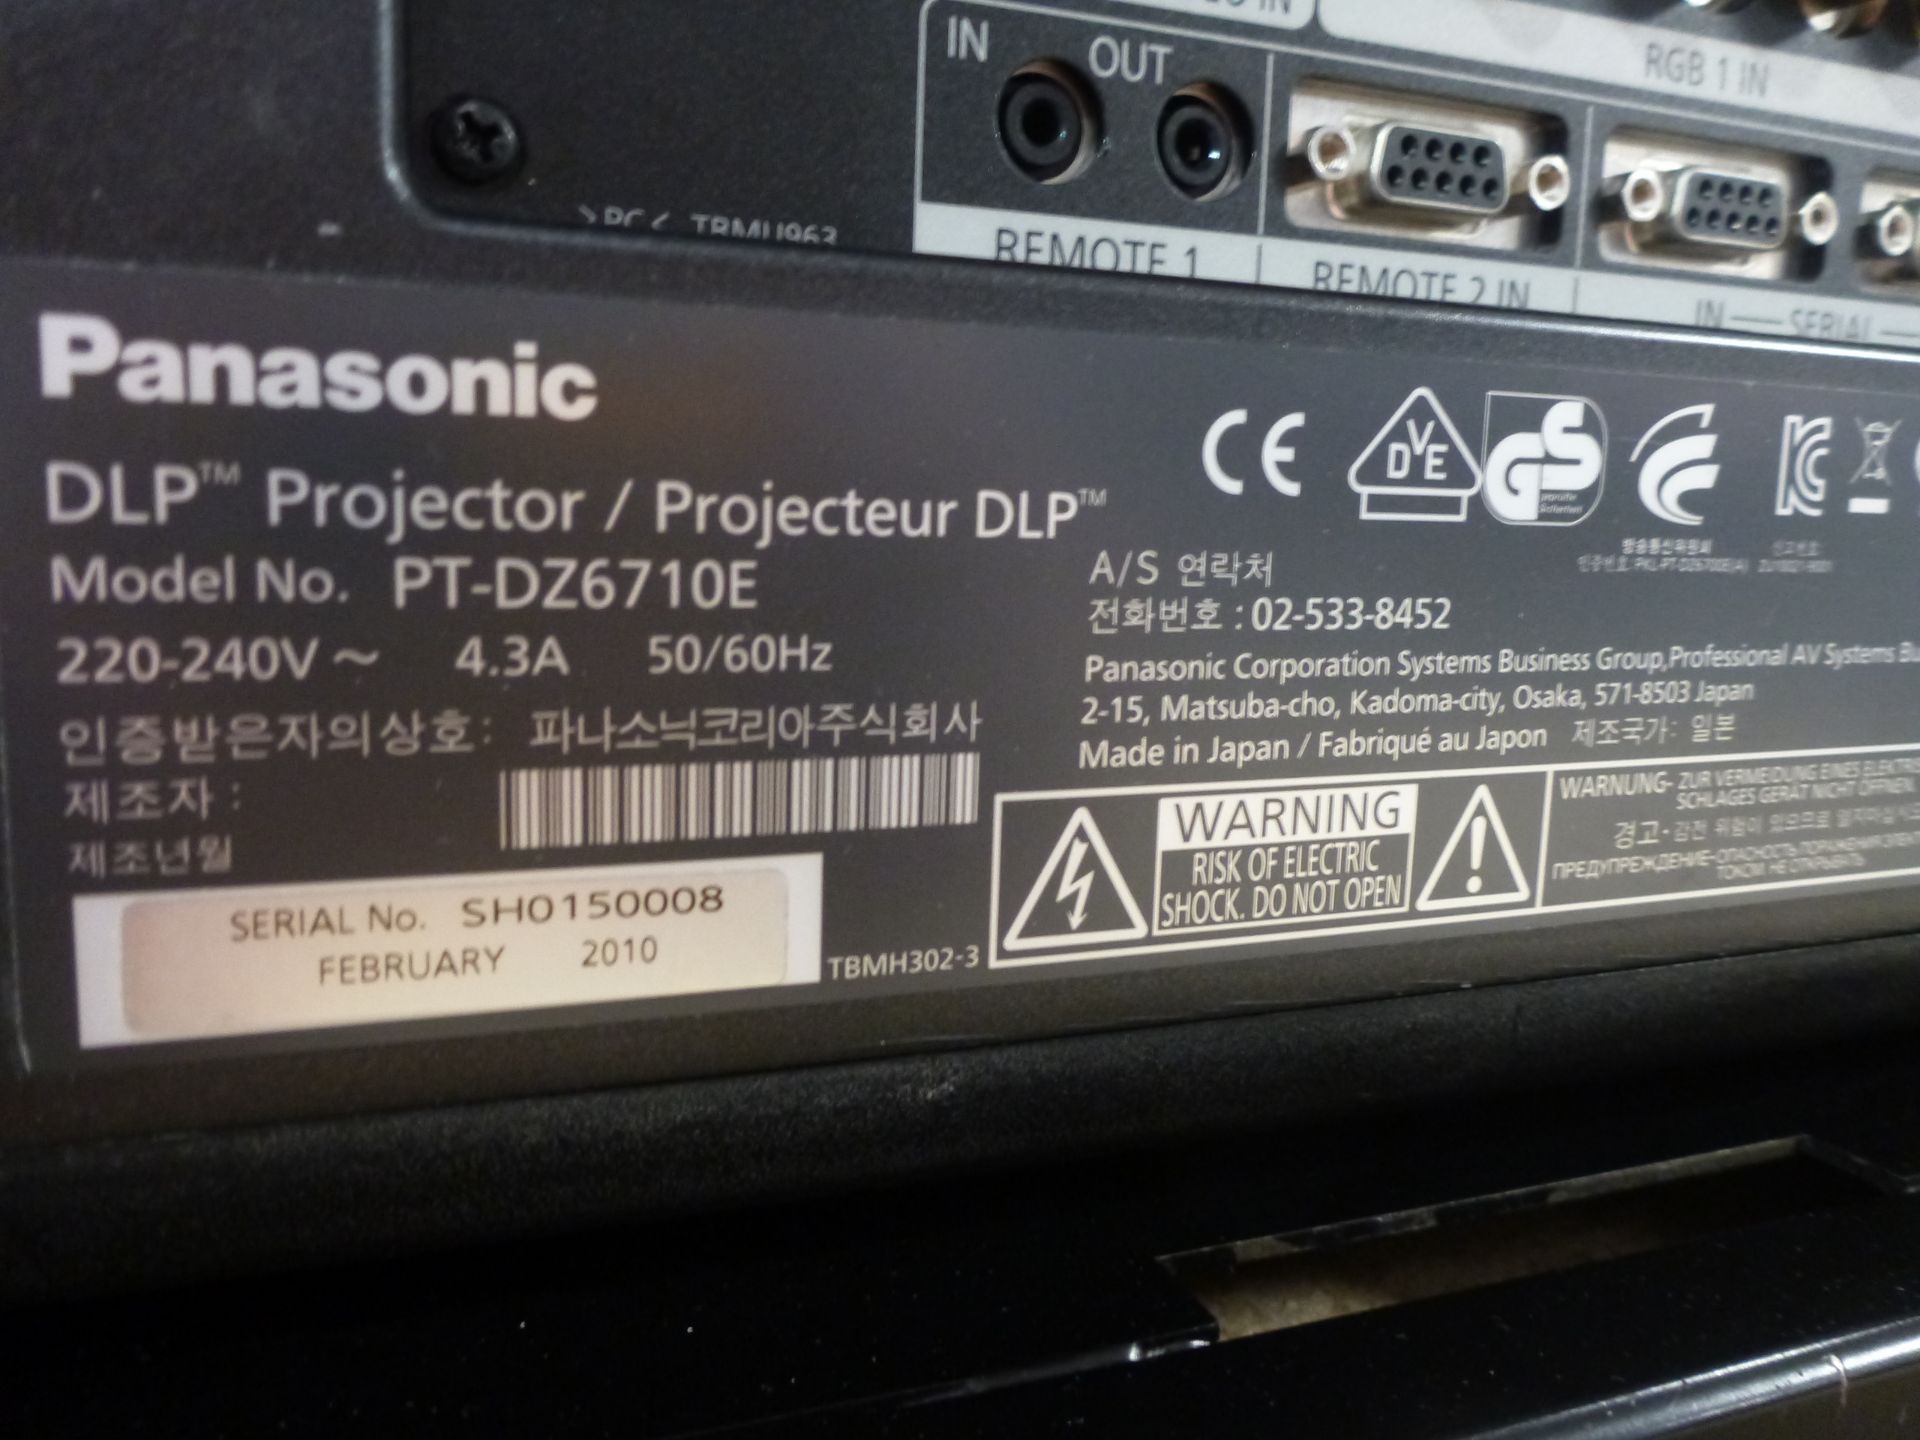 Panasonic Projector, Model PT-DZ6710E, S/N SH0150008, YOM 2010, In flight case with standard 1.3-1. - Image 7 of 14